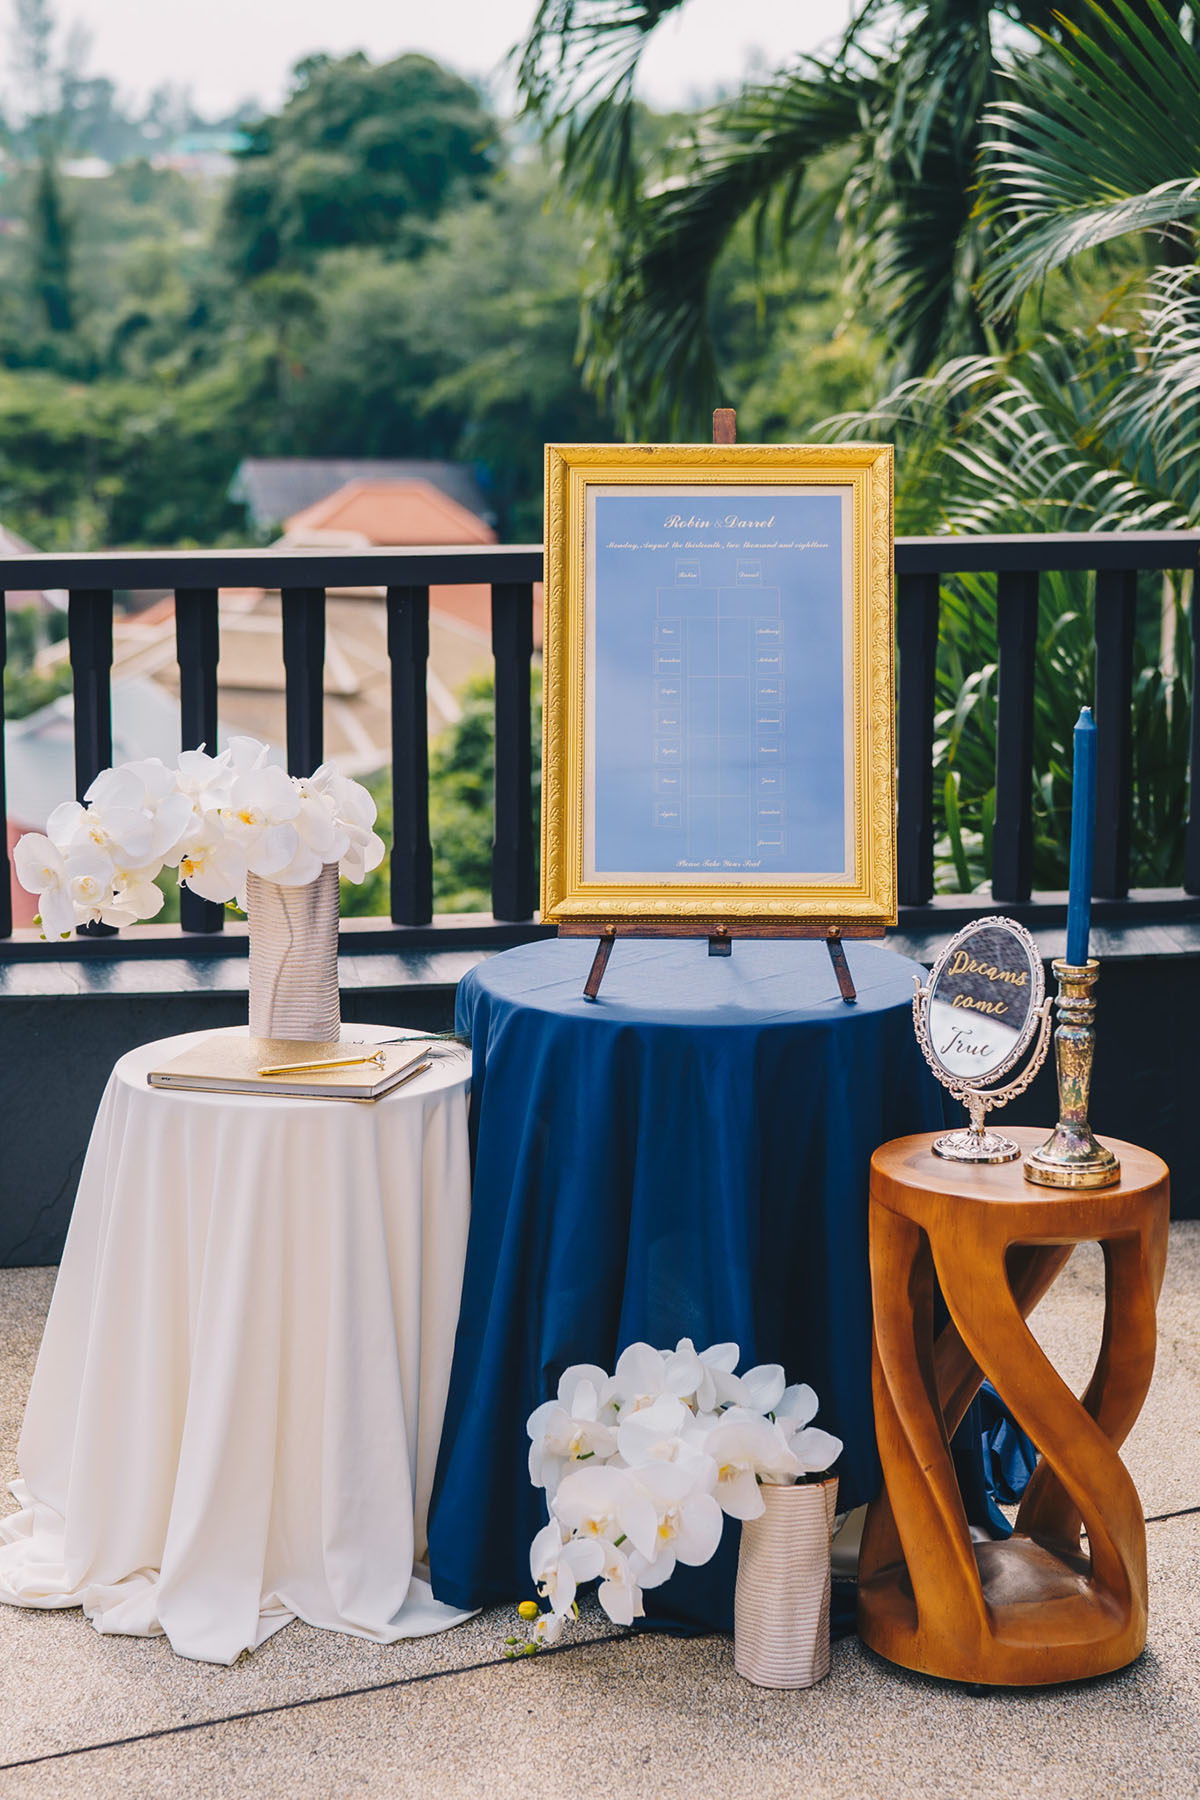 Seating chart in gold frame